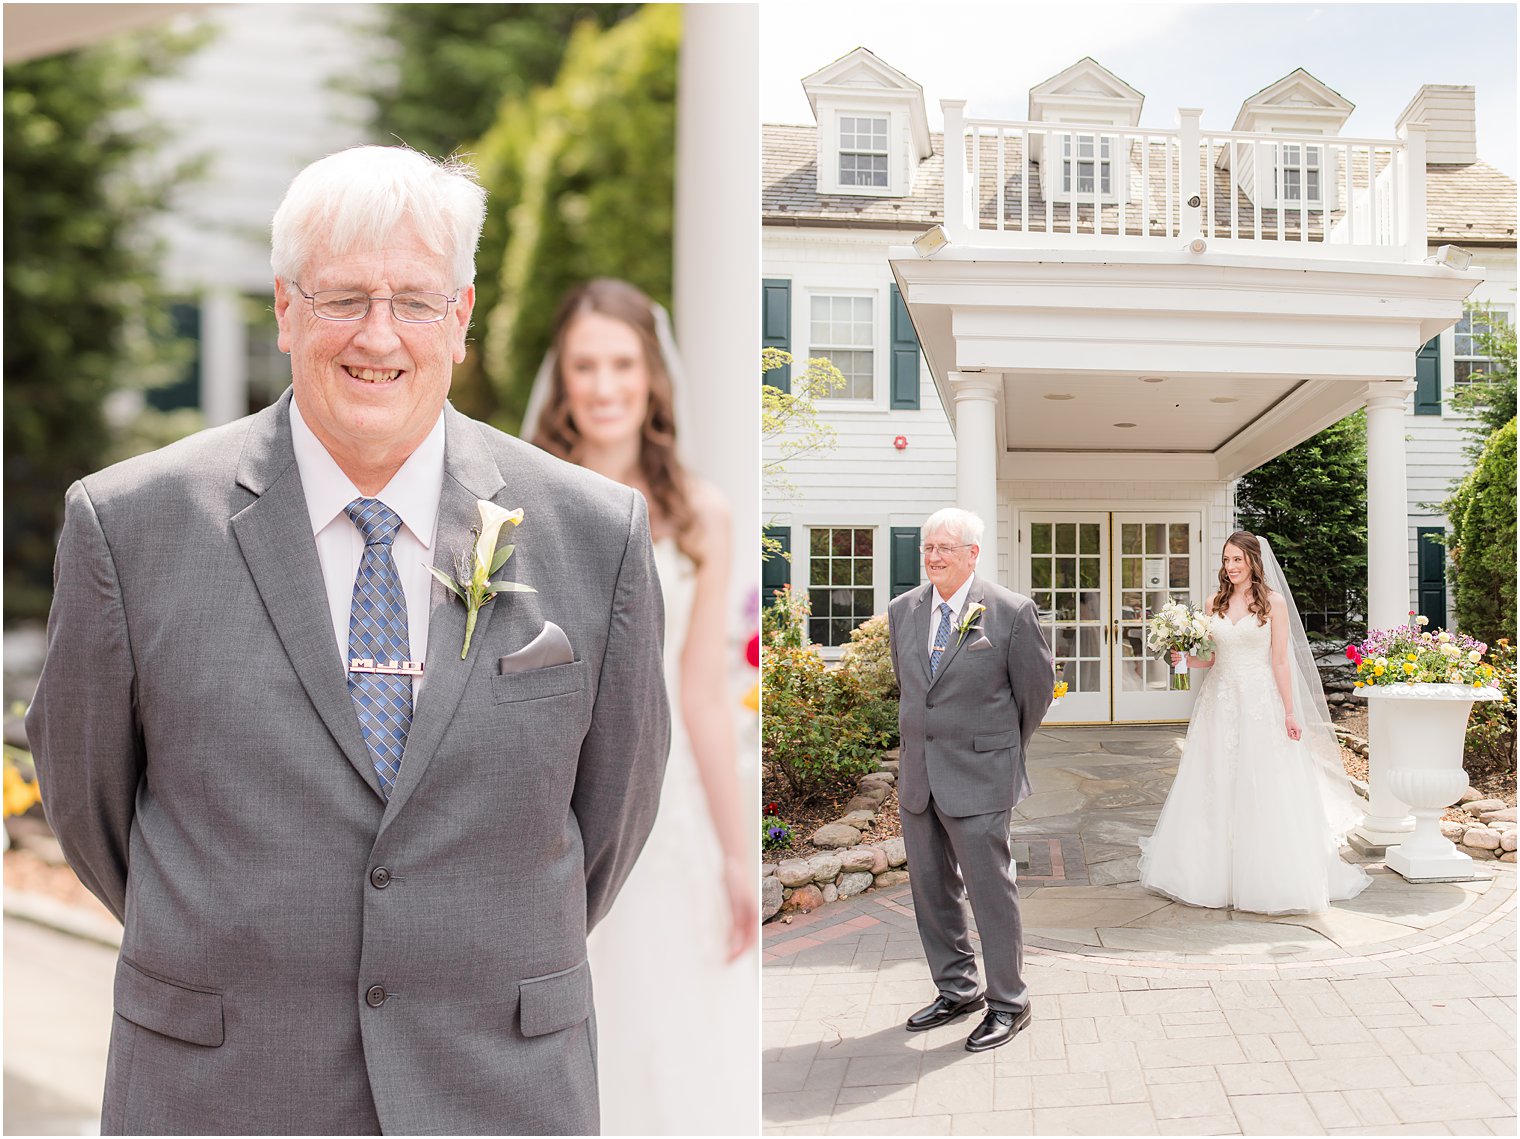 Daddy Daughter First Look: Getting Ready Photo Ideas for Wedding Day shared by New Jersey wedding photographer Idalia Photography